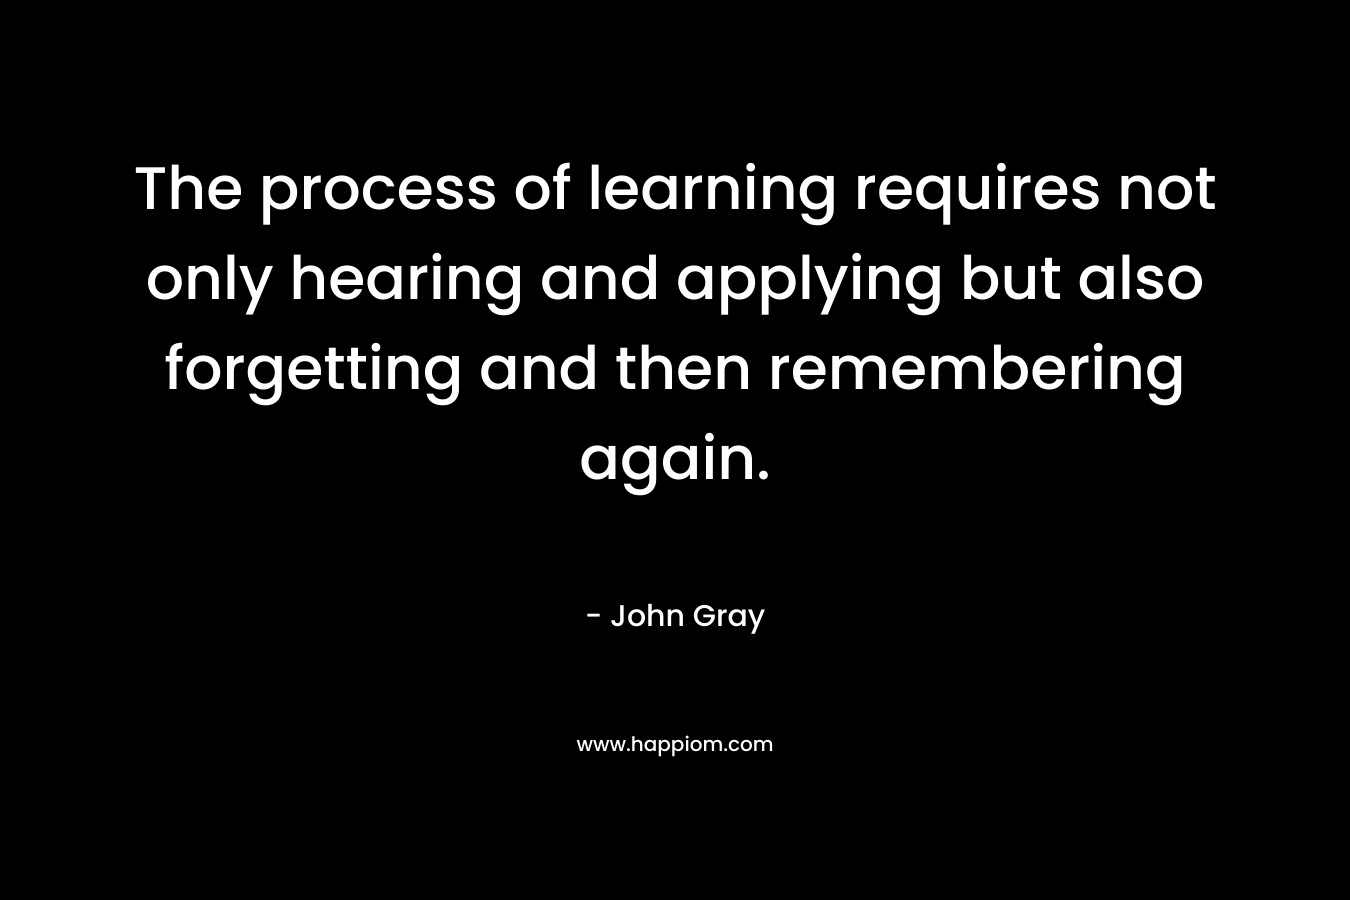 The process of learning requires not only hearing and applying but also forgetting and then remembering again.